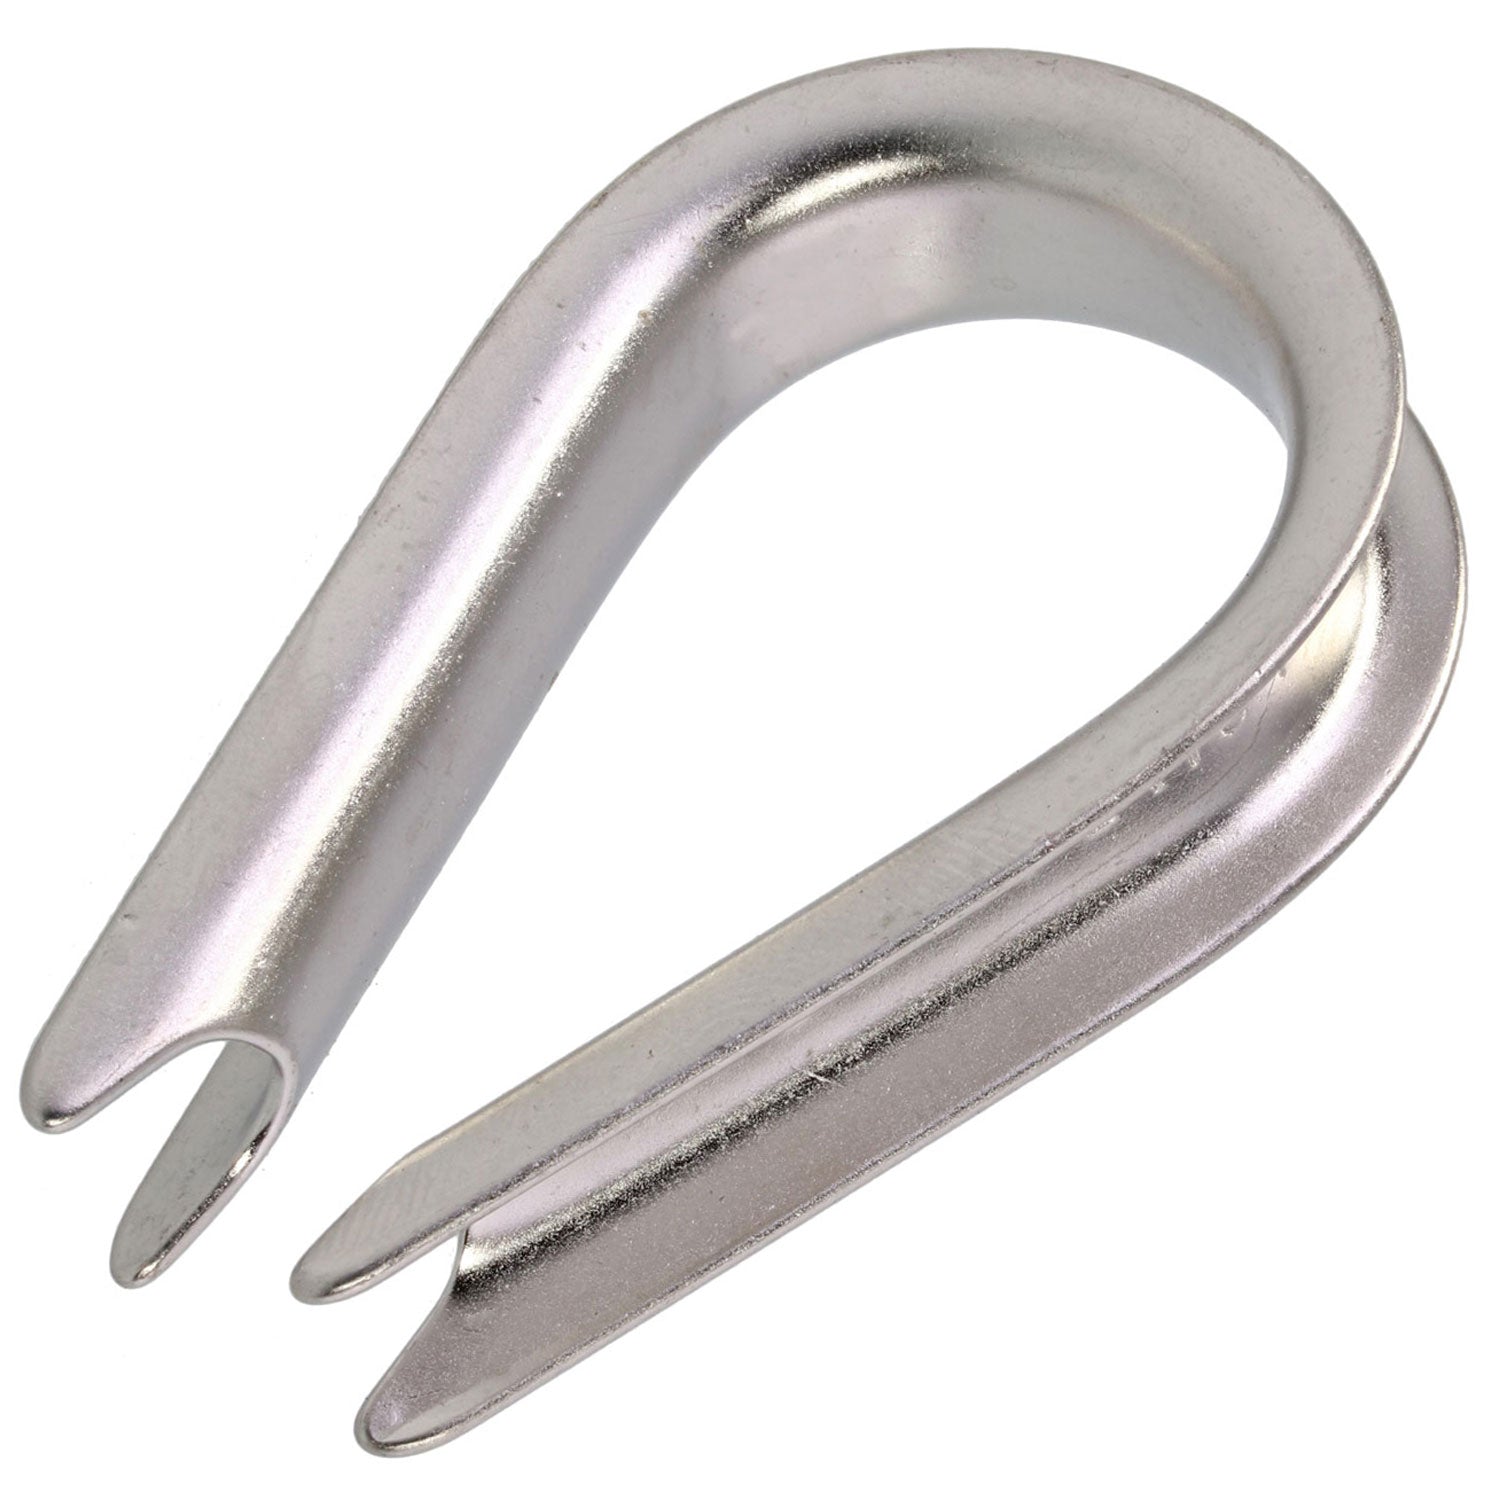 1/8 Stainless Steel Light Duty Wire Rope Thimble